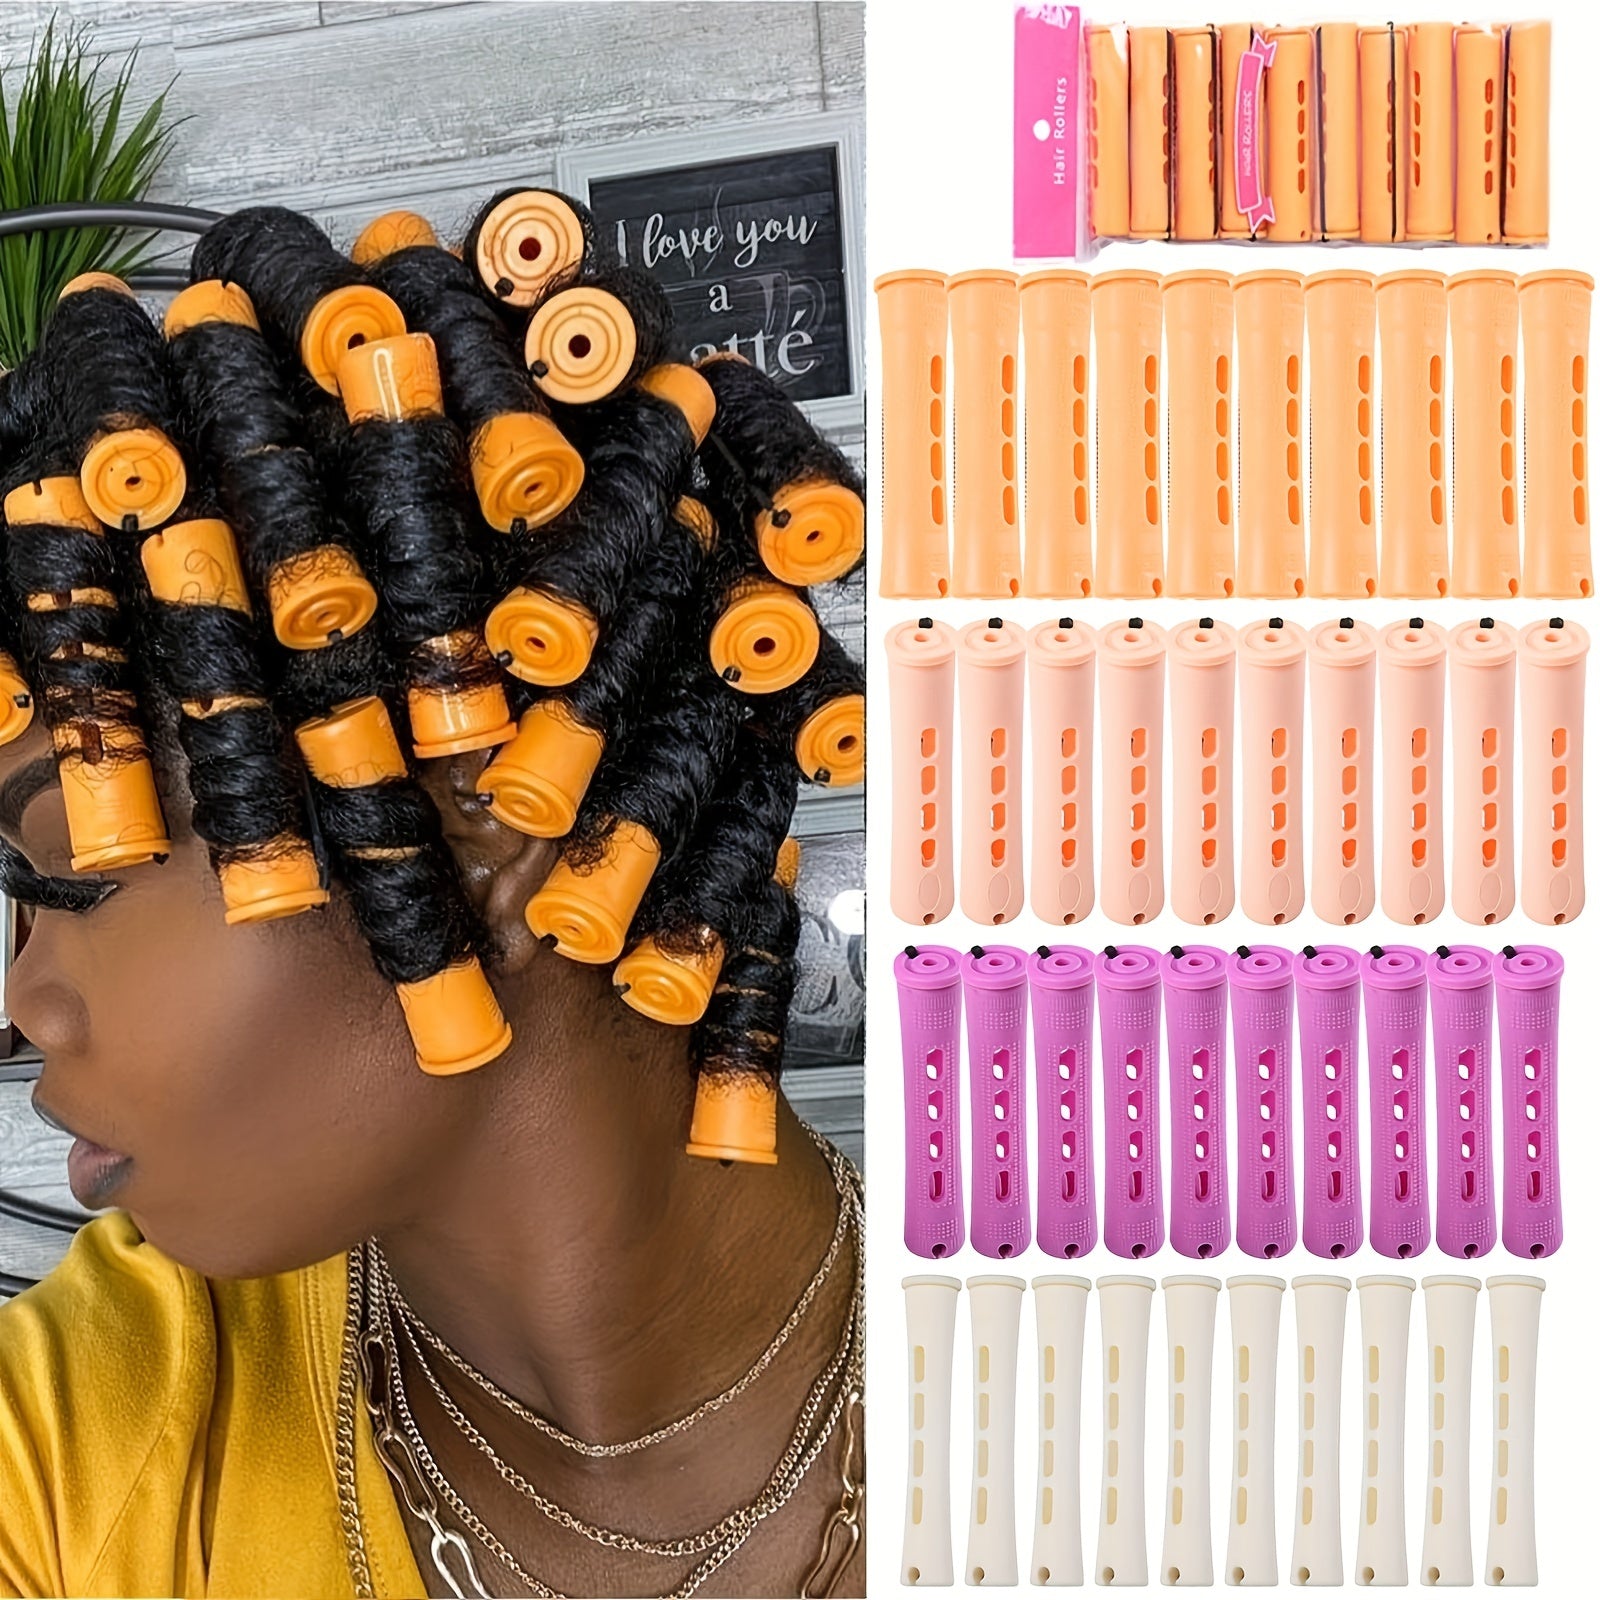 40pcs DIY Perm Rods Set, 4 Sizes Cold Wave Rods Hair Rollers No Heat Hair Curling Rods For Long Medium Small Hair Curler Styling DIY Hairdressing Tools For Women Girls